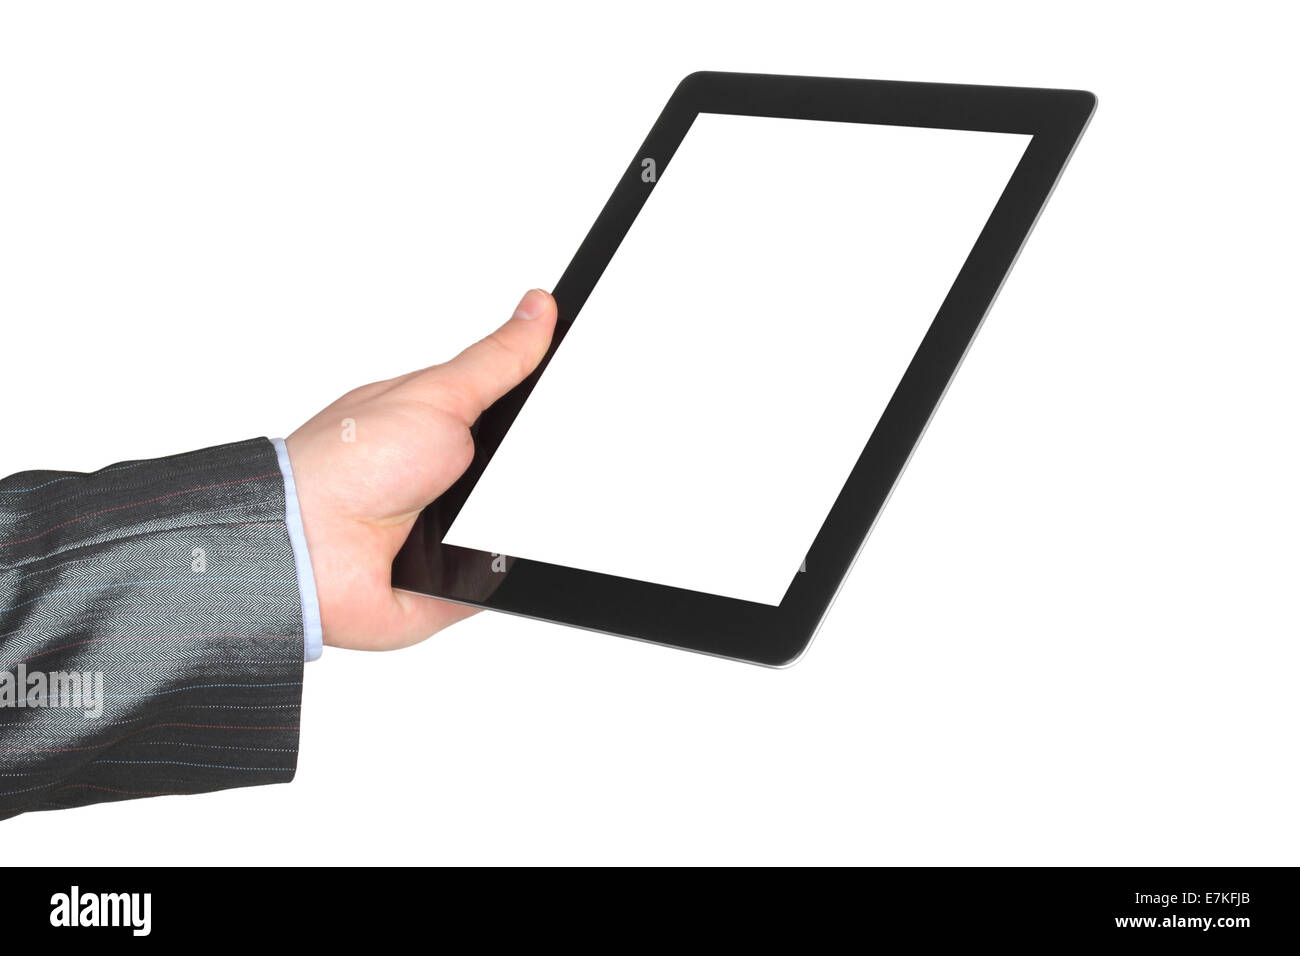 Man hand holding tablet PC on white background Stock Photo